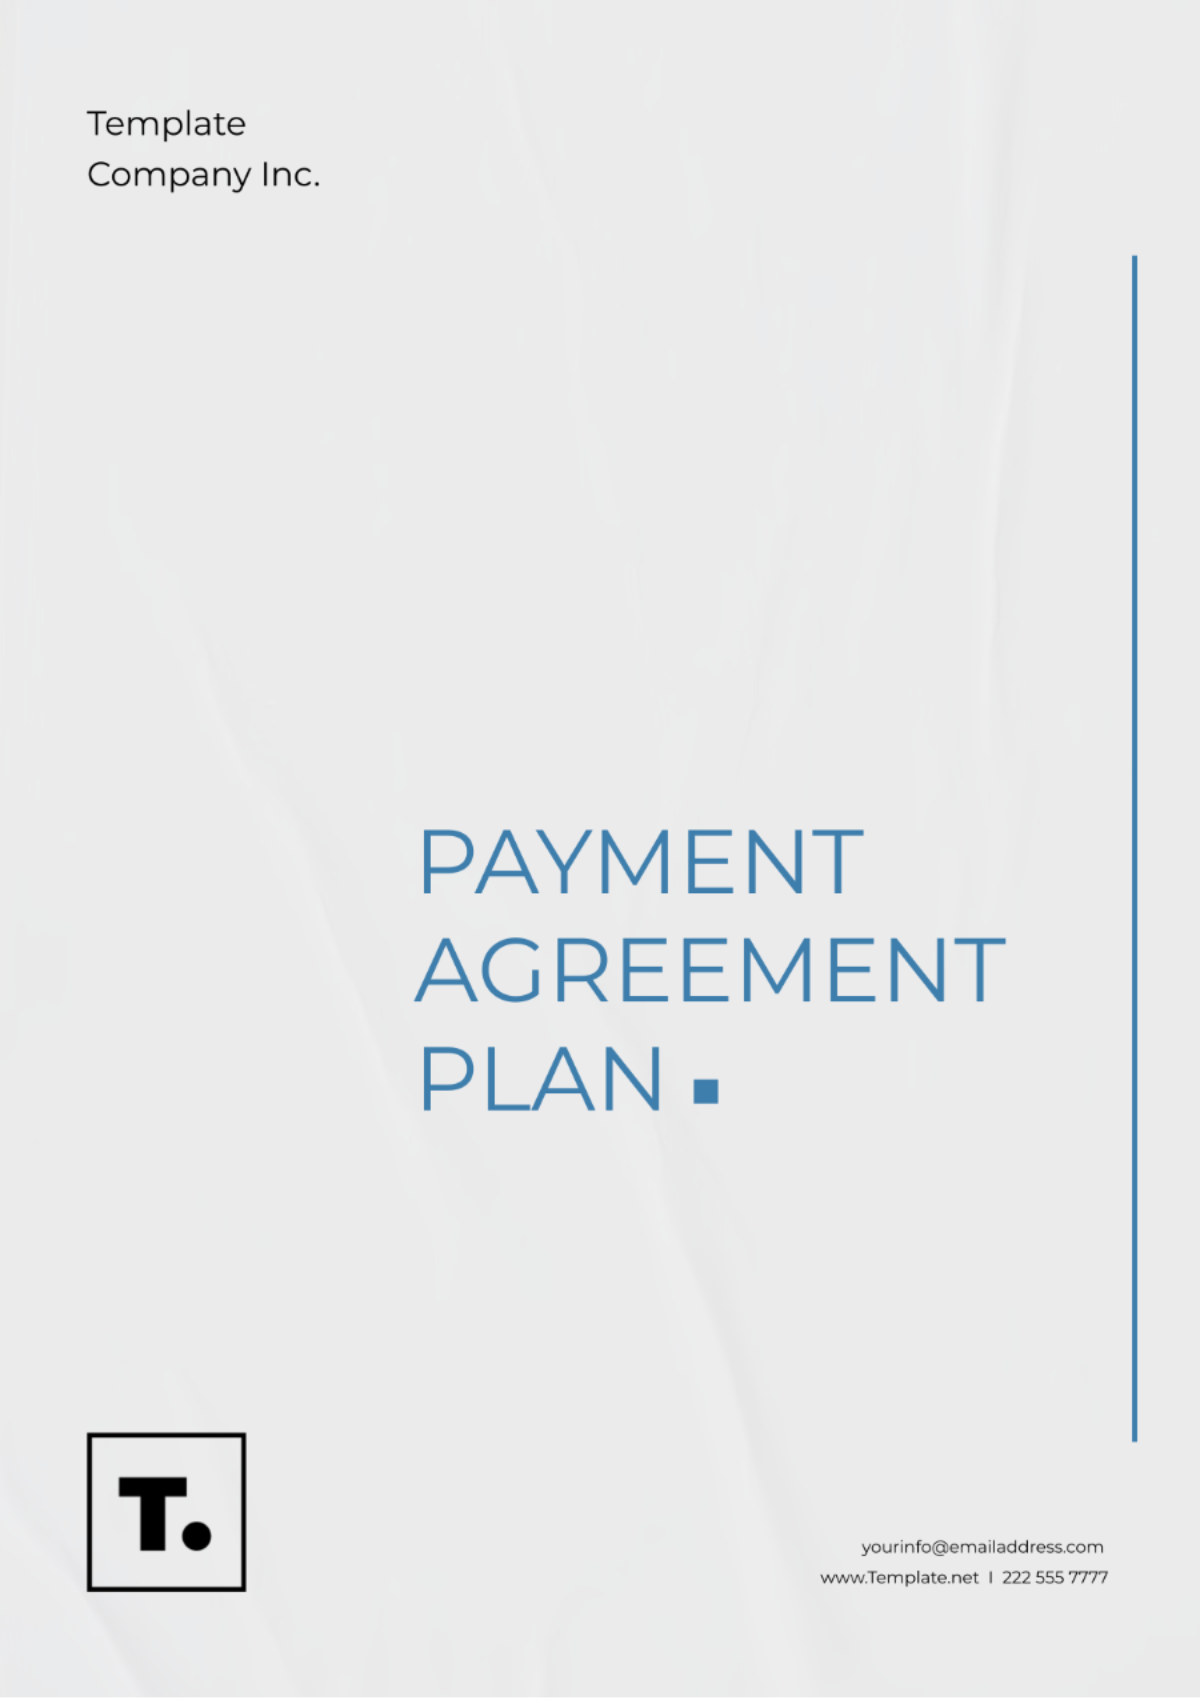 Free Payment Agreement Plan Template